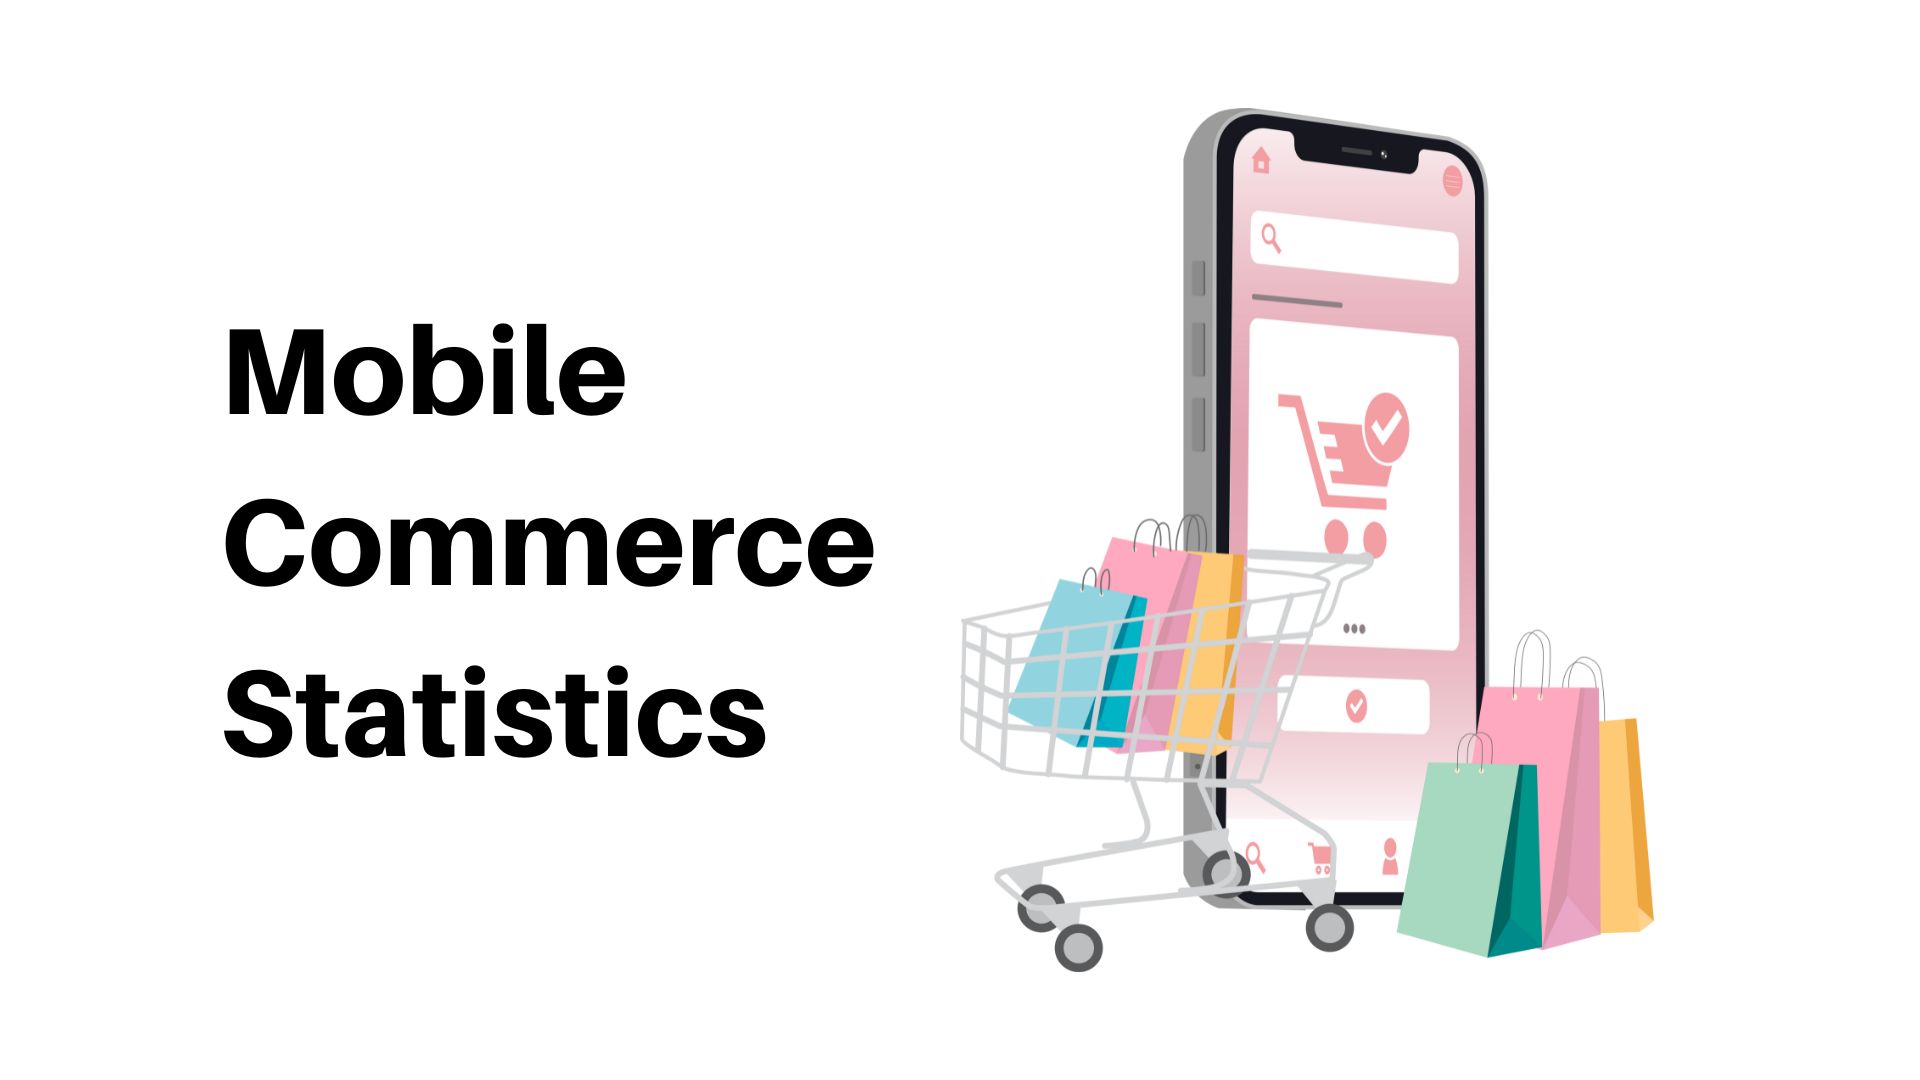 Mobile Commerce Statistics By Demography, Payment Methods, Mobile Search, Country and Mobile Voice Searches